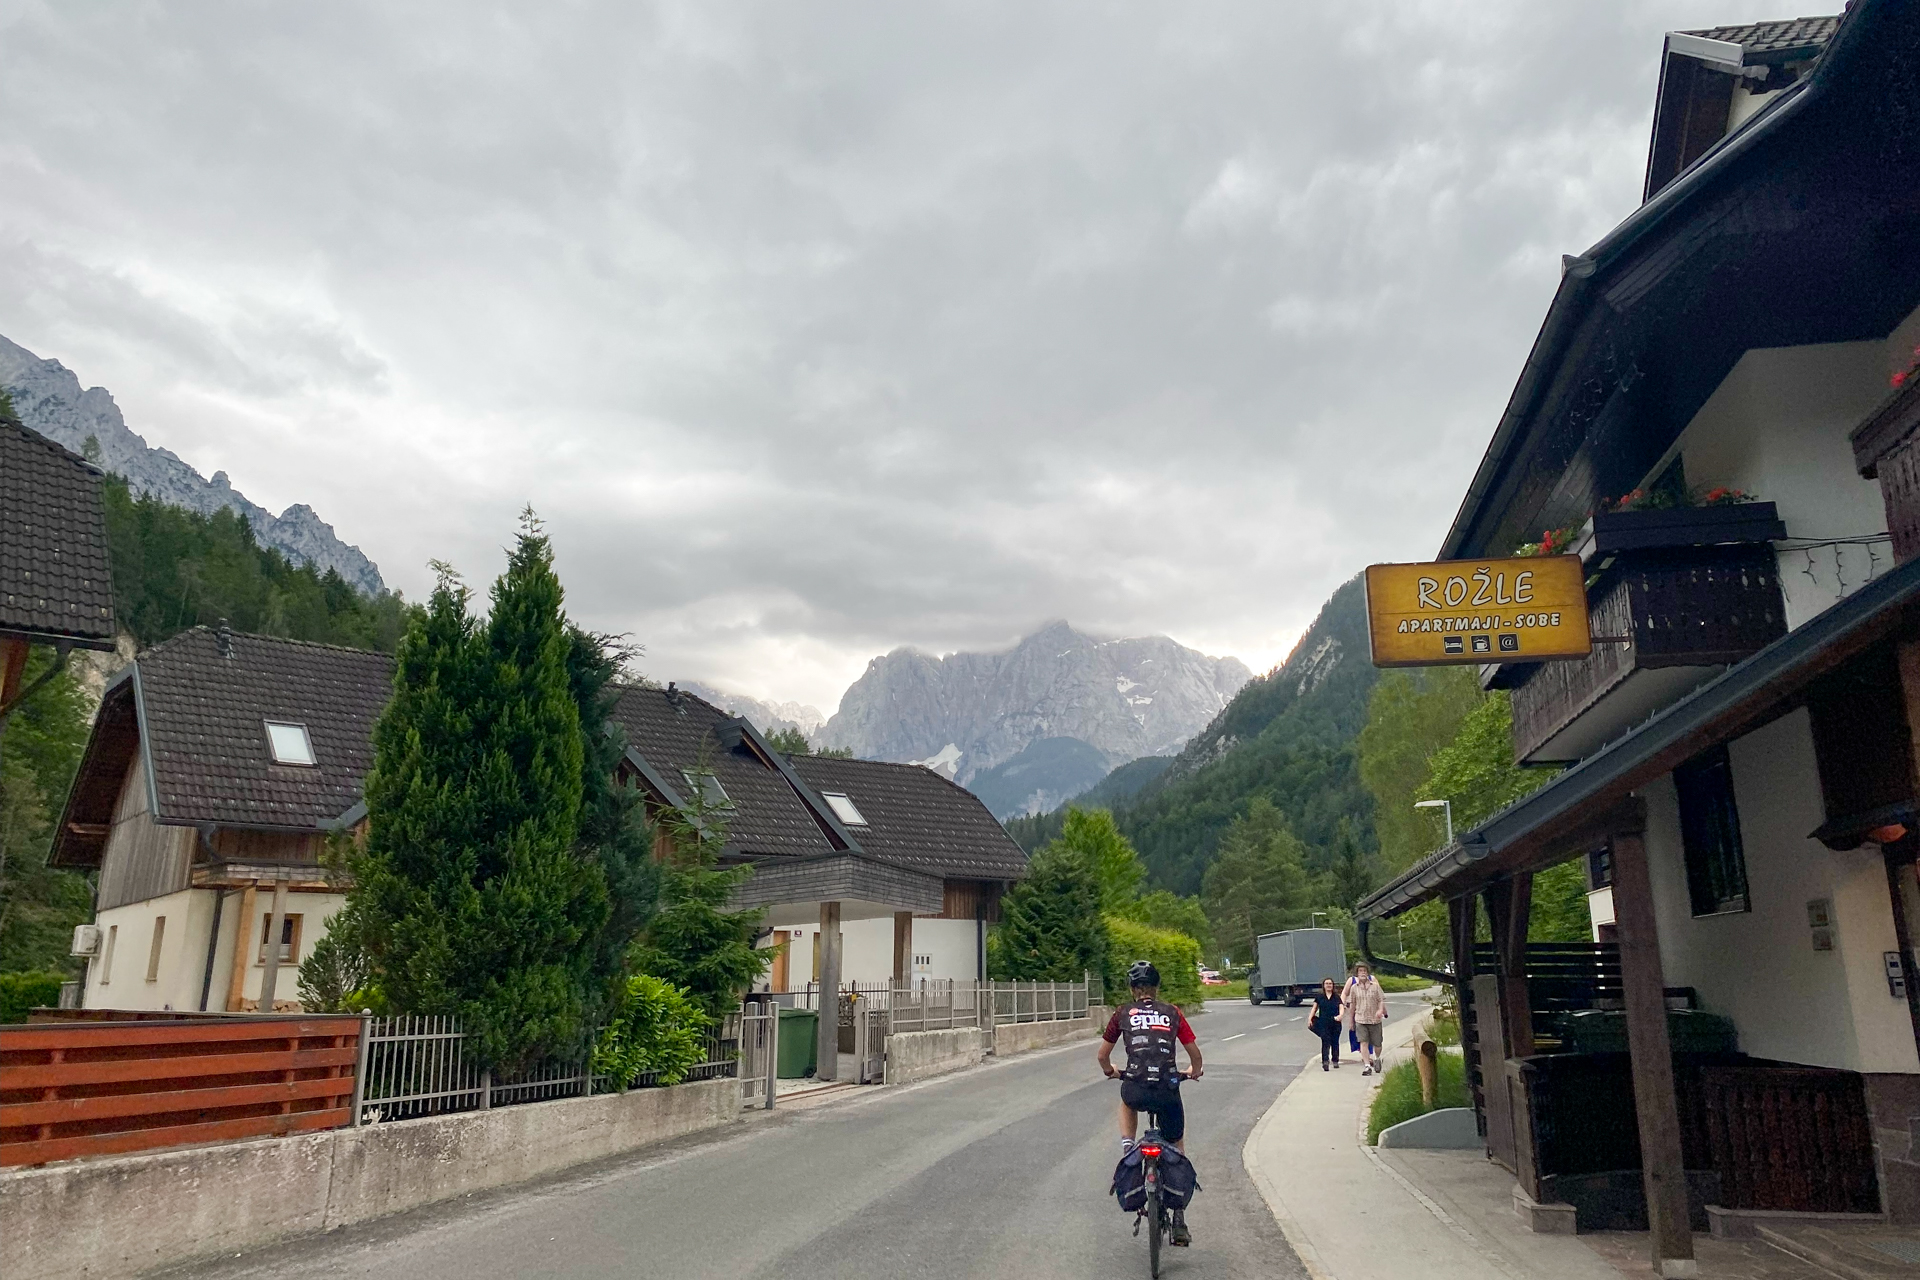 A lone cyclist rides through a small town with cloud-covered mountains in the background.